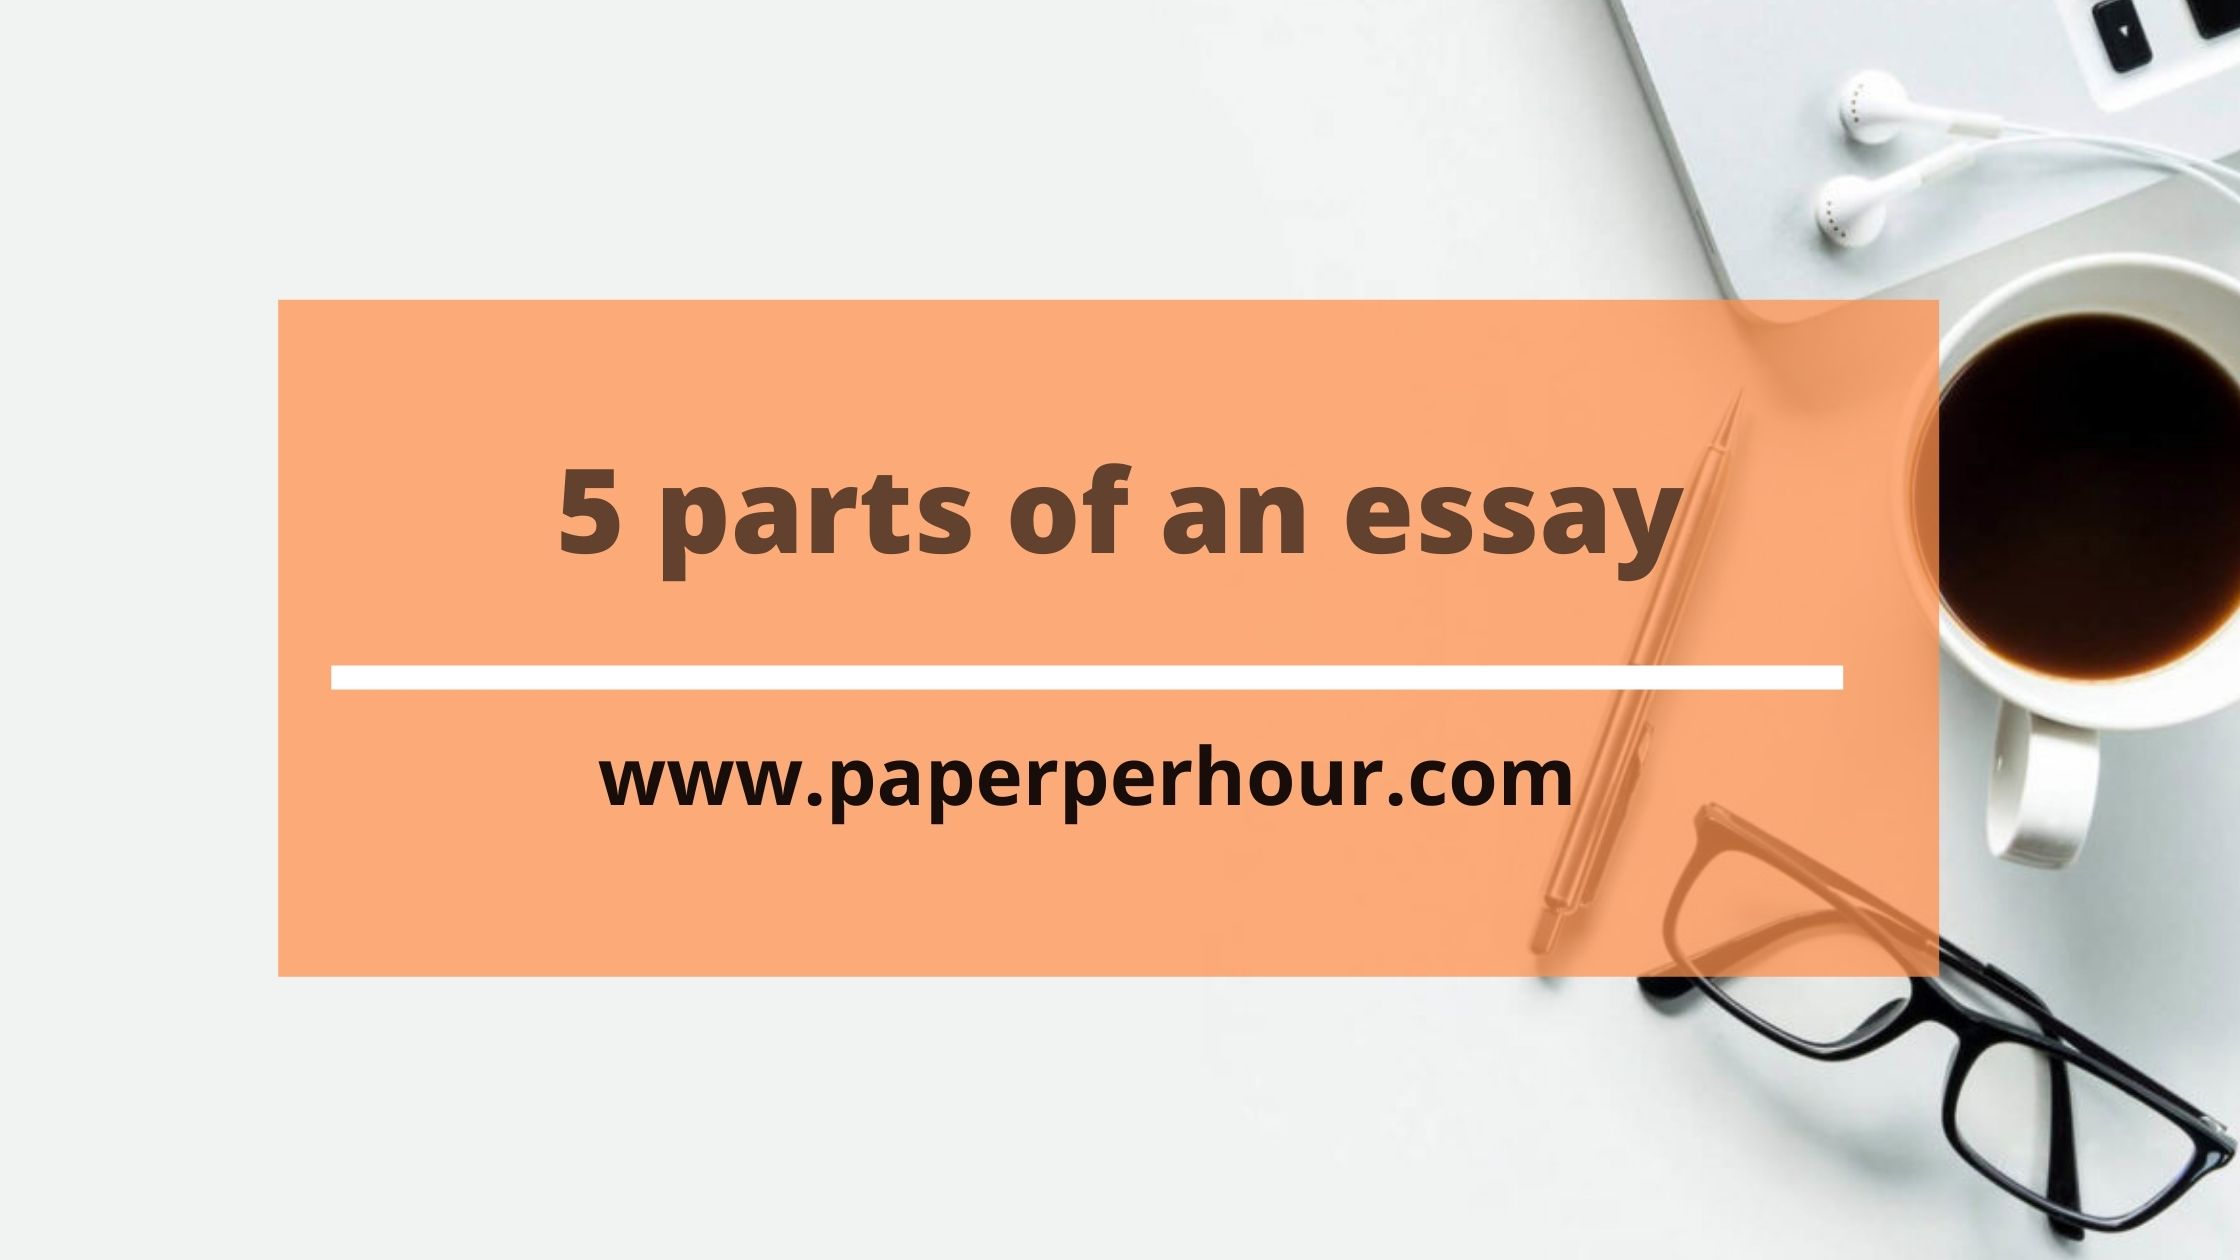 5 main parts of an essay